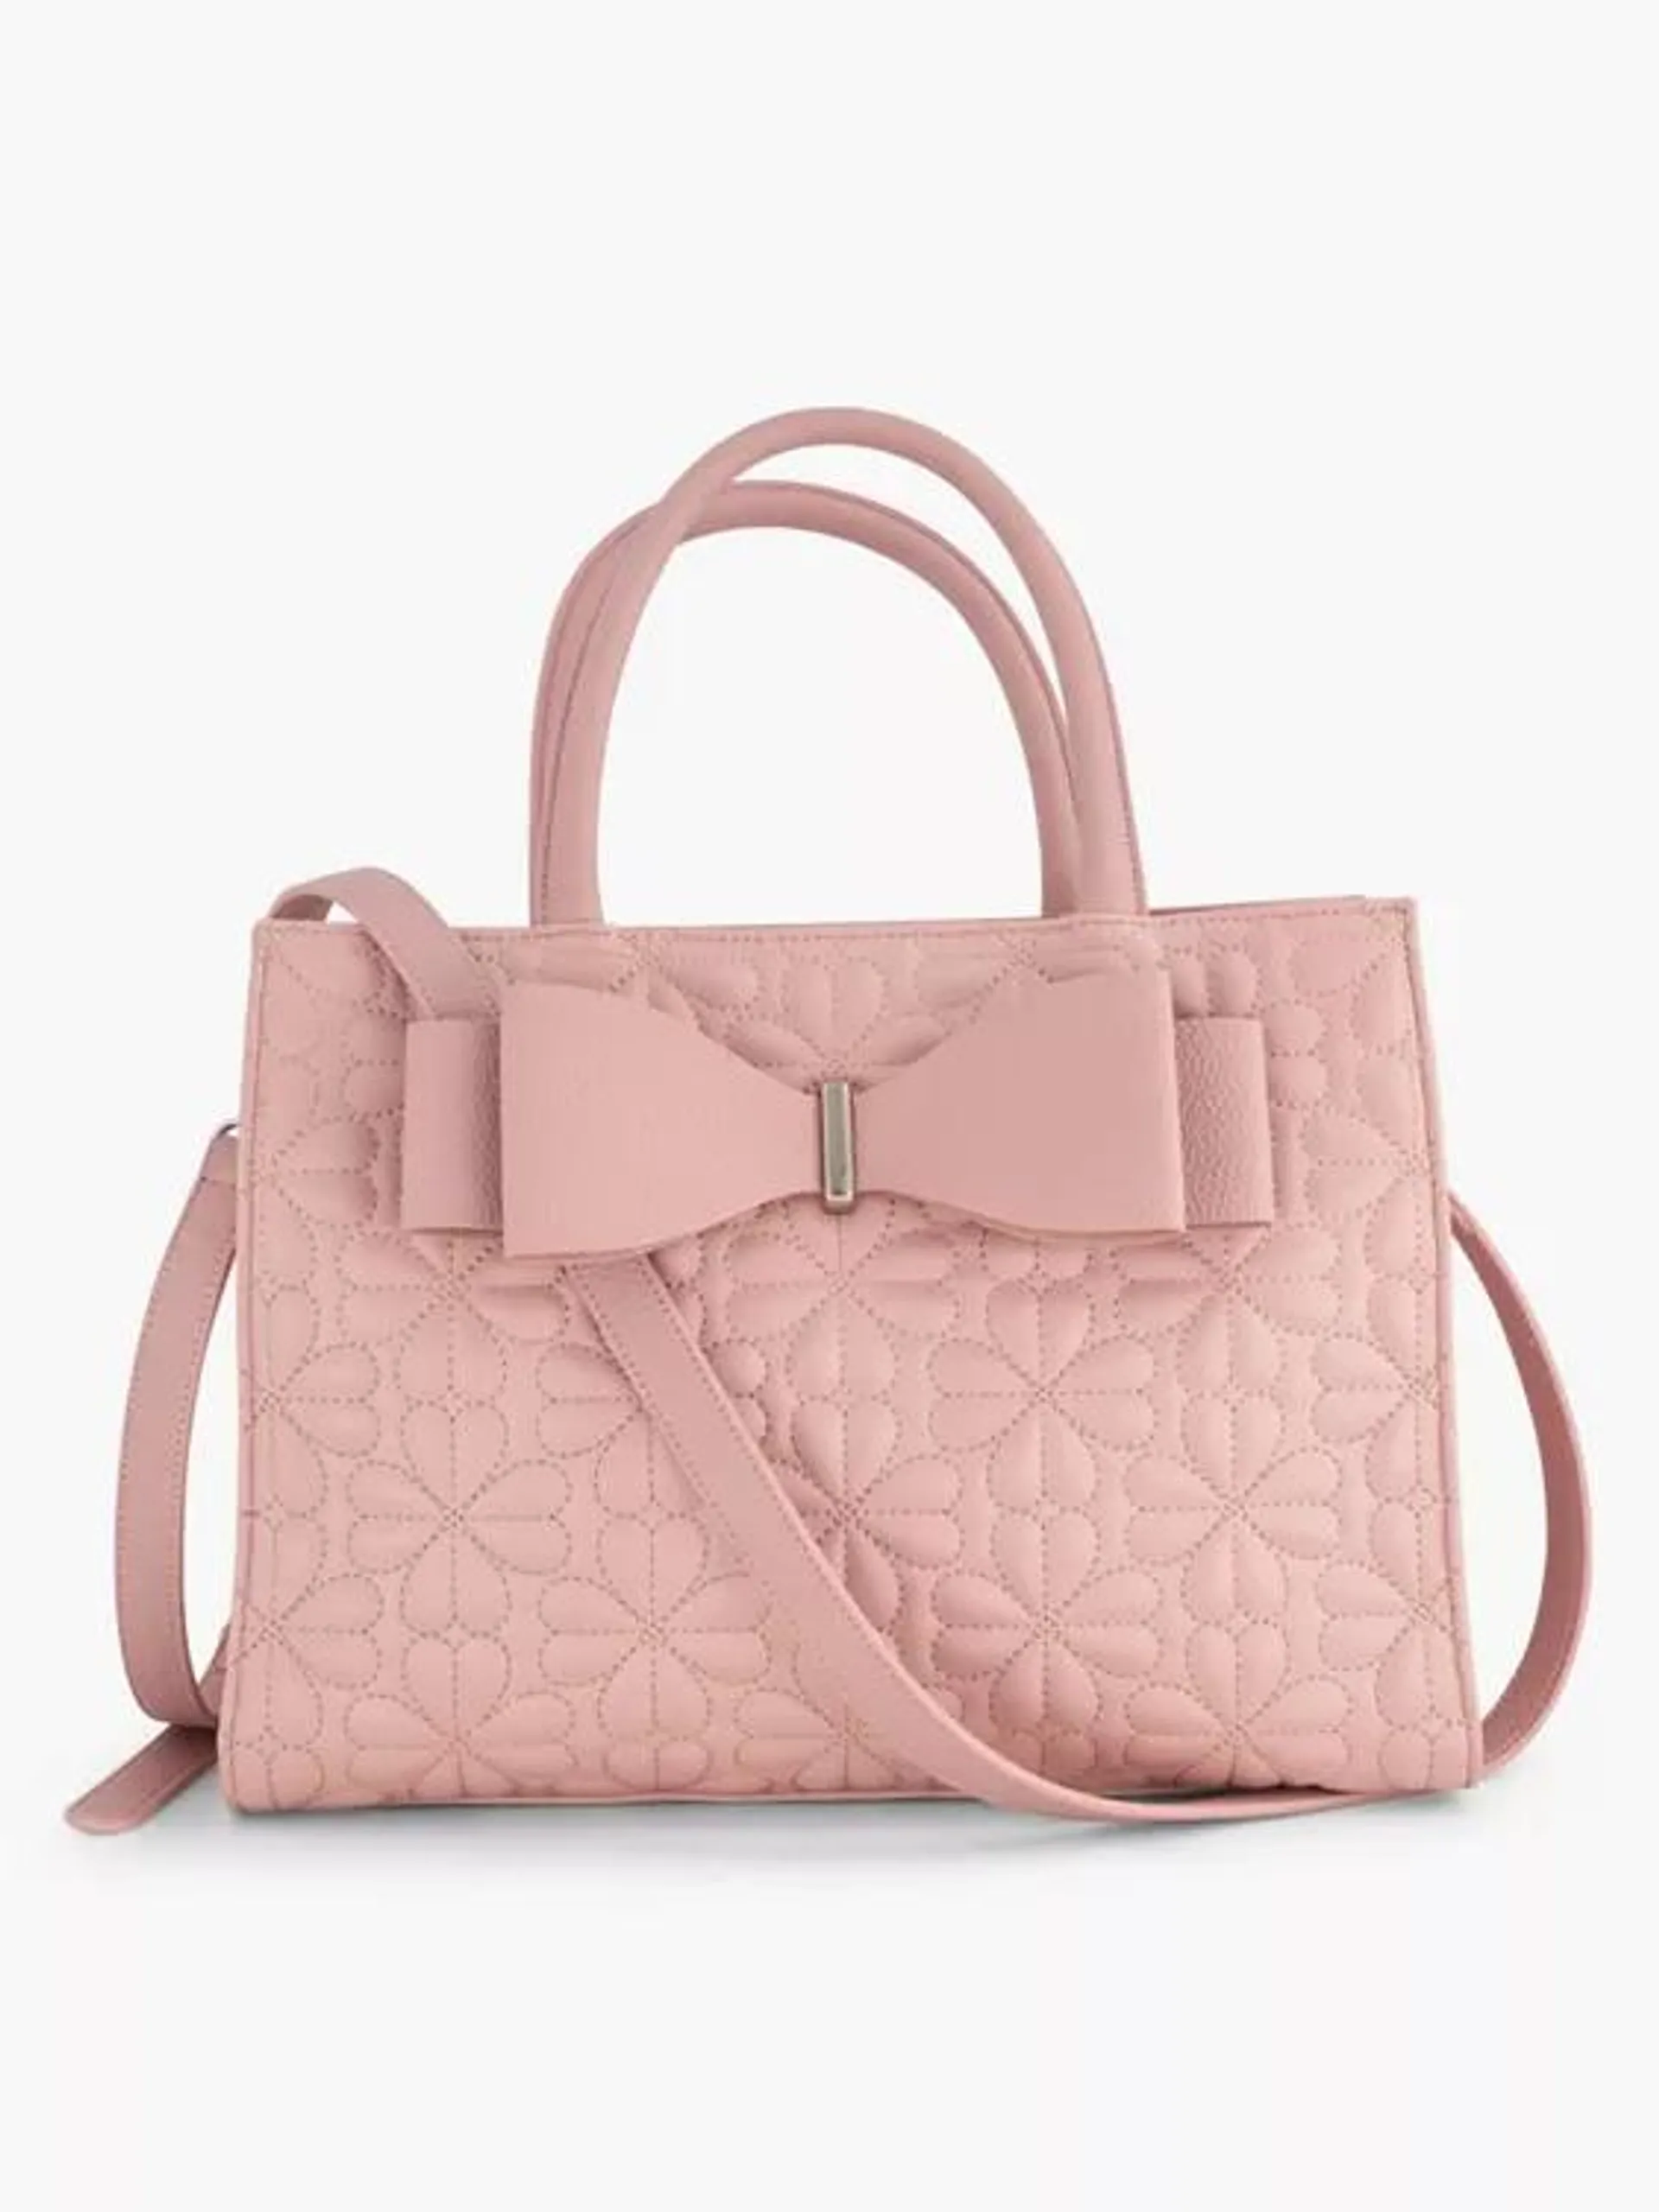 Pink Bow Detail Handbag with Quilted Detail and Adjustable Strap